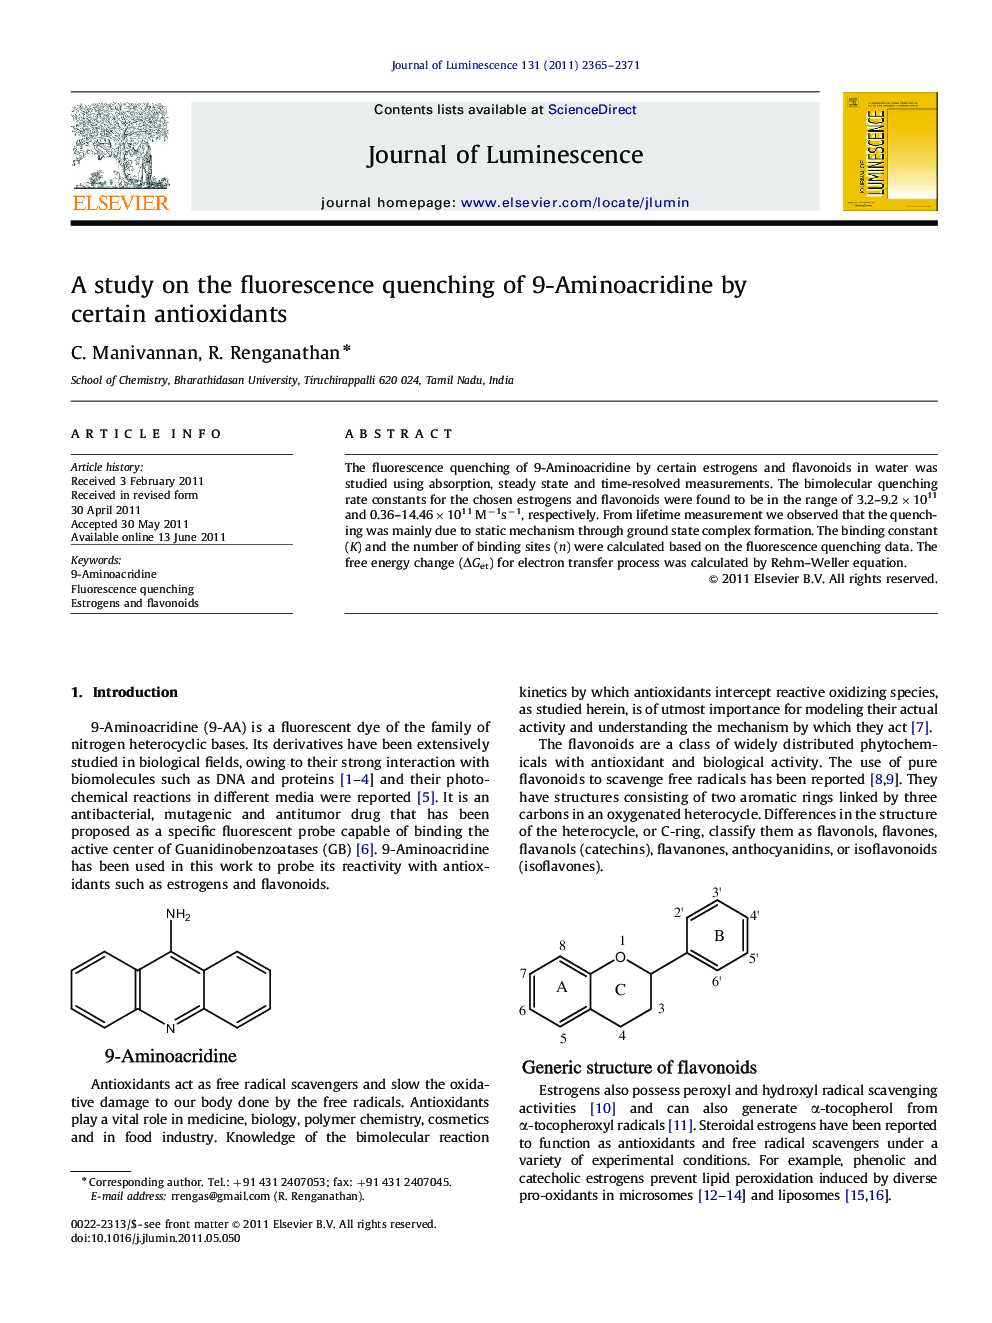 A study on the fluorescence quenching of 9-Aminoacridine by certain antioxidants